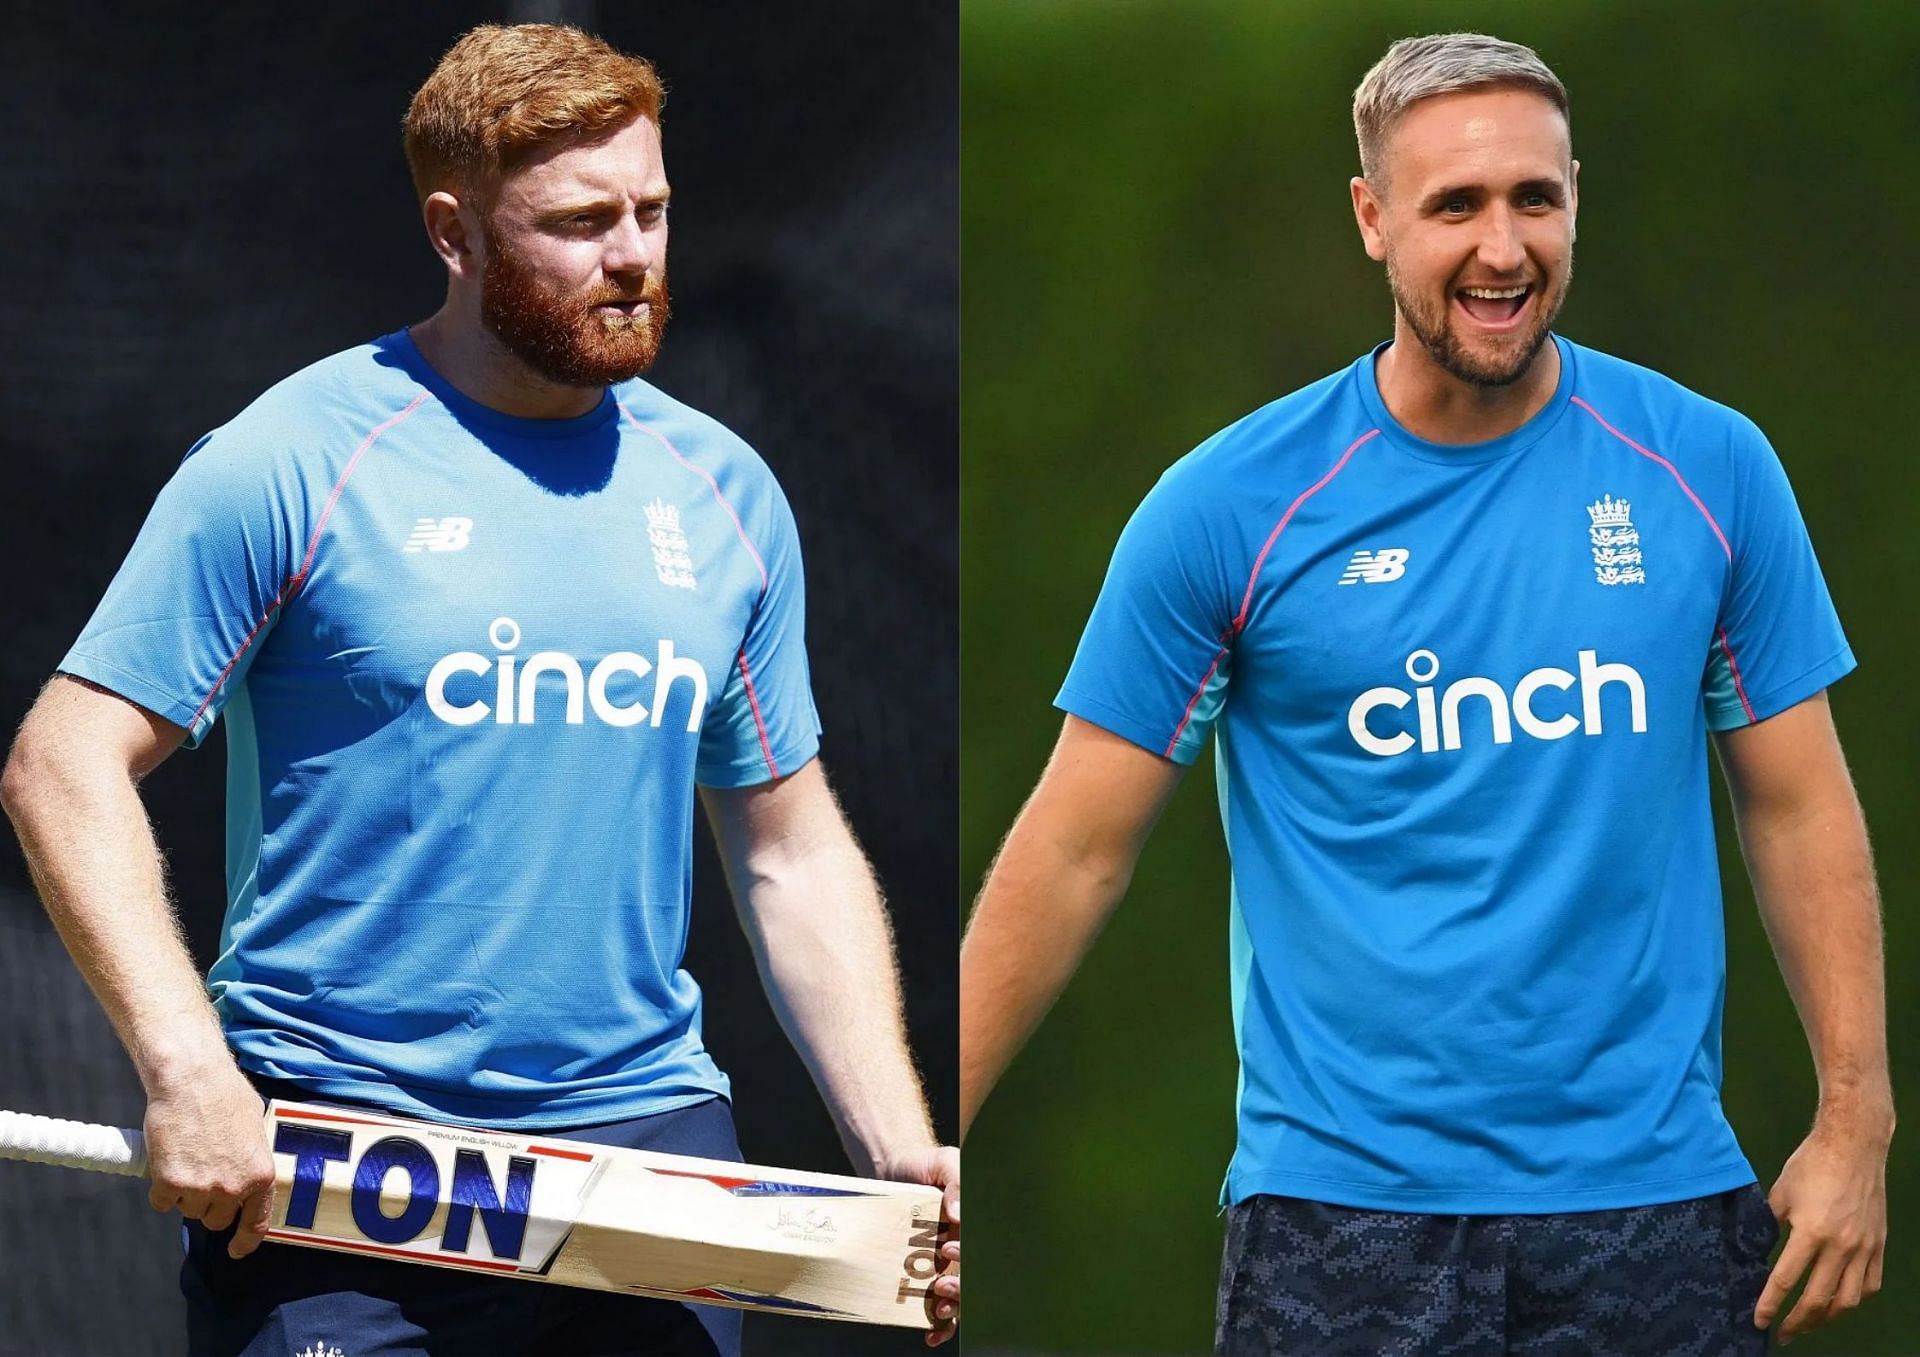 England players such as Jonny Bairstow and Liam Livingstone will attract a lot of attention at the IPL 2022 Auction.